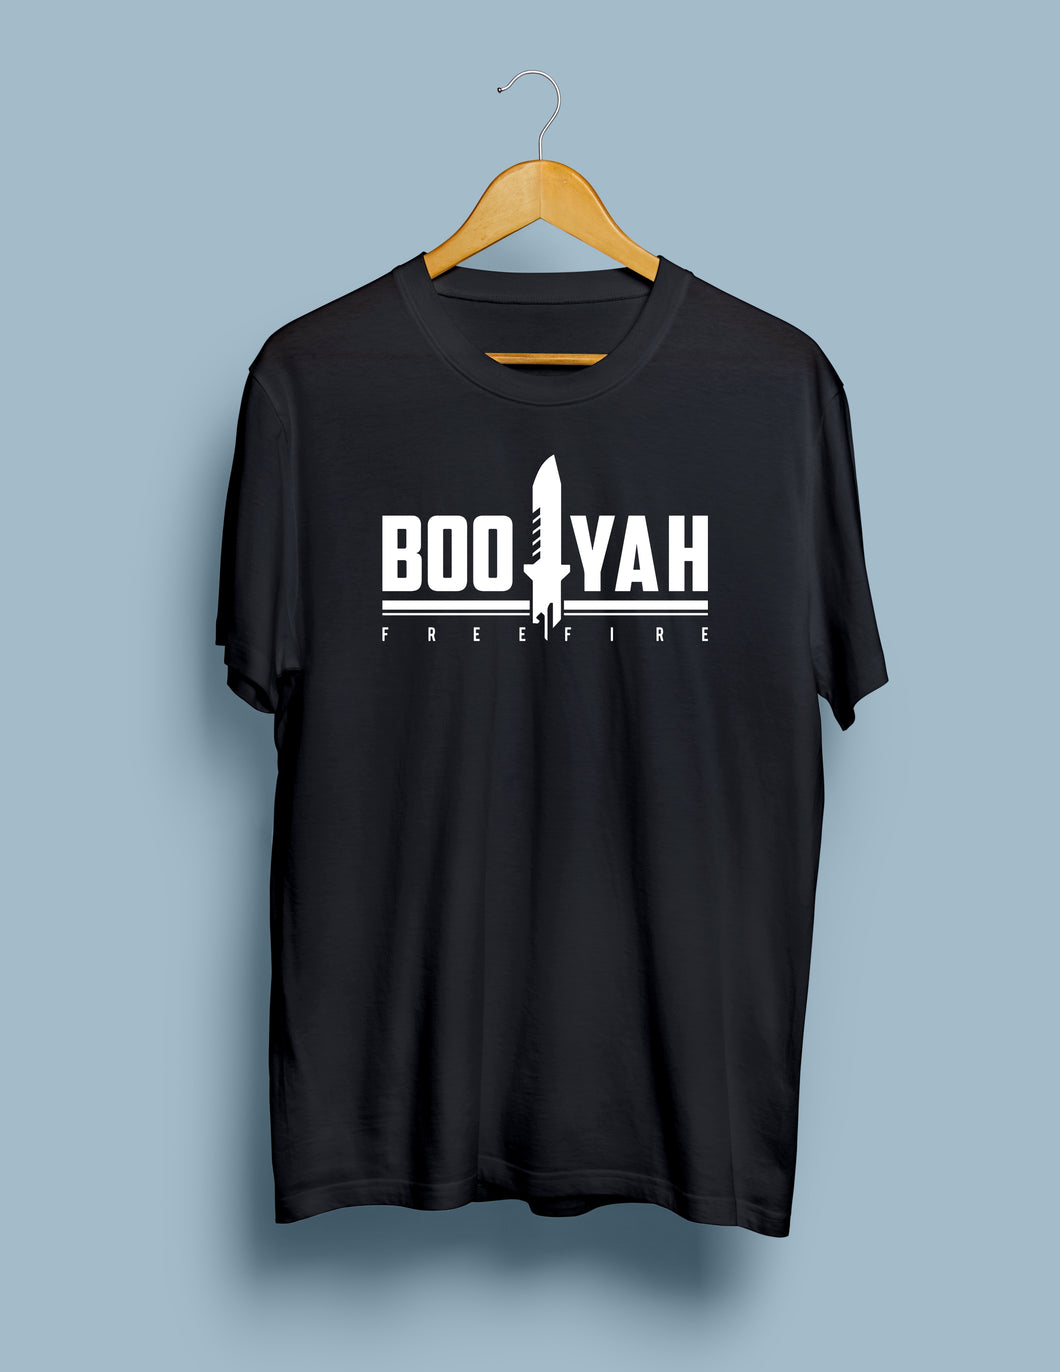 BooYah T-shirt - A&S Covers